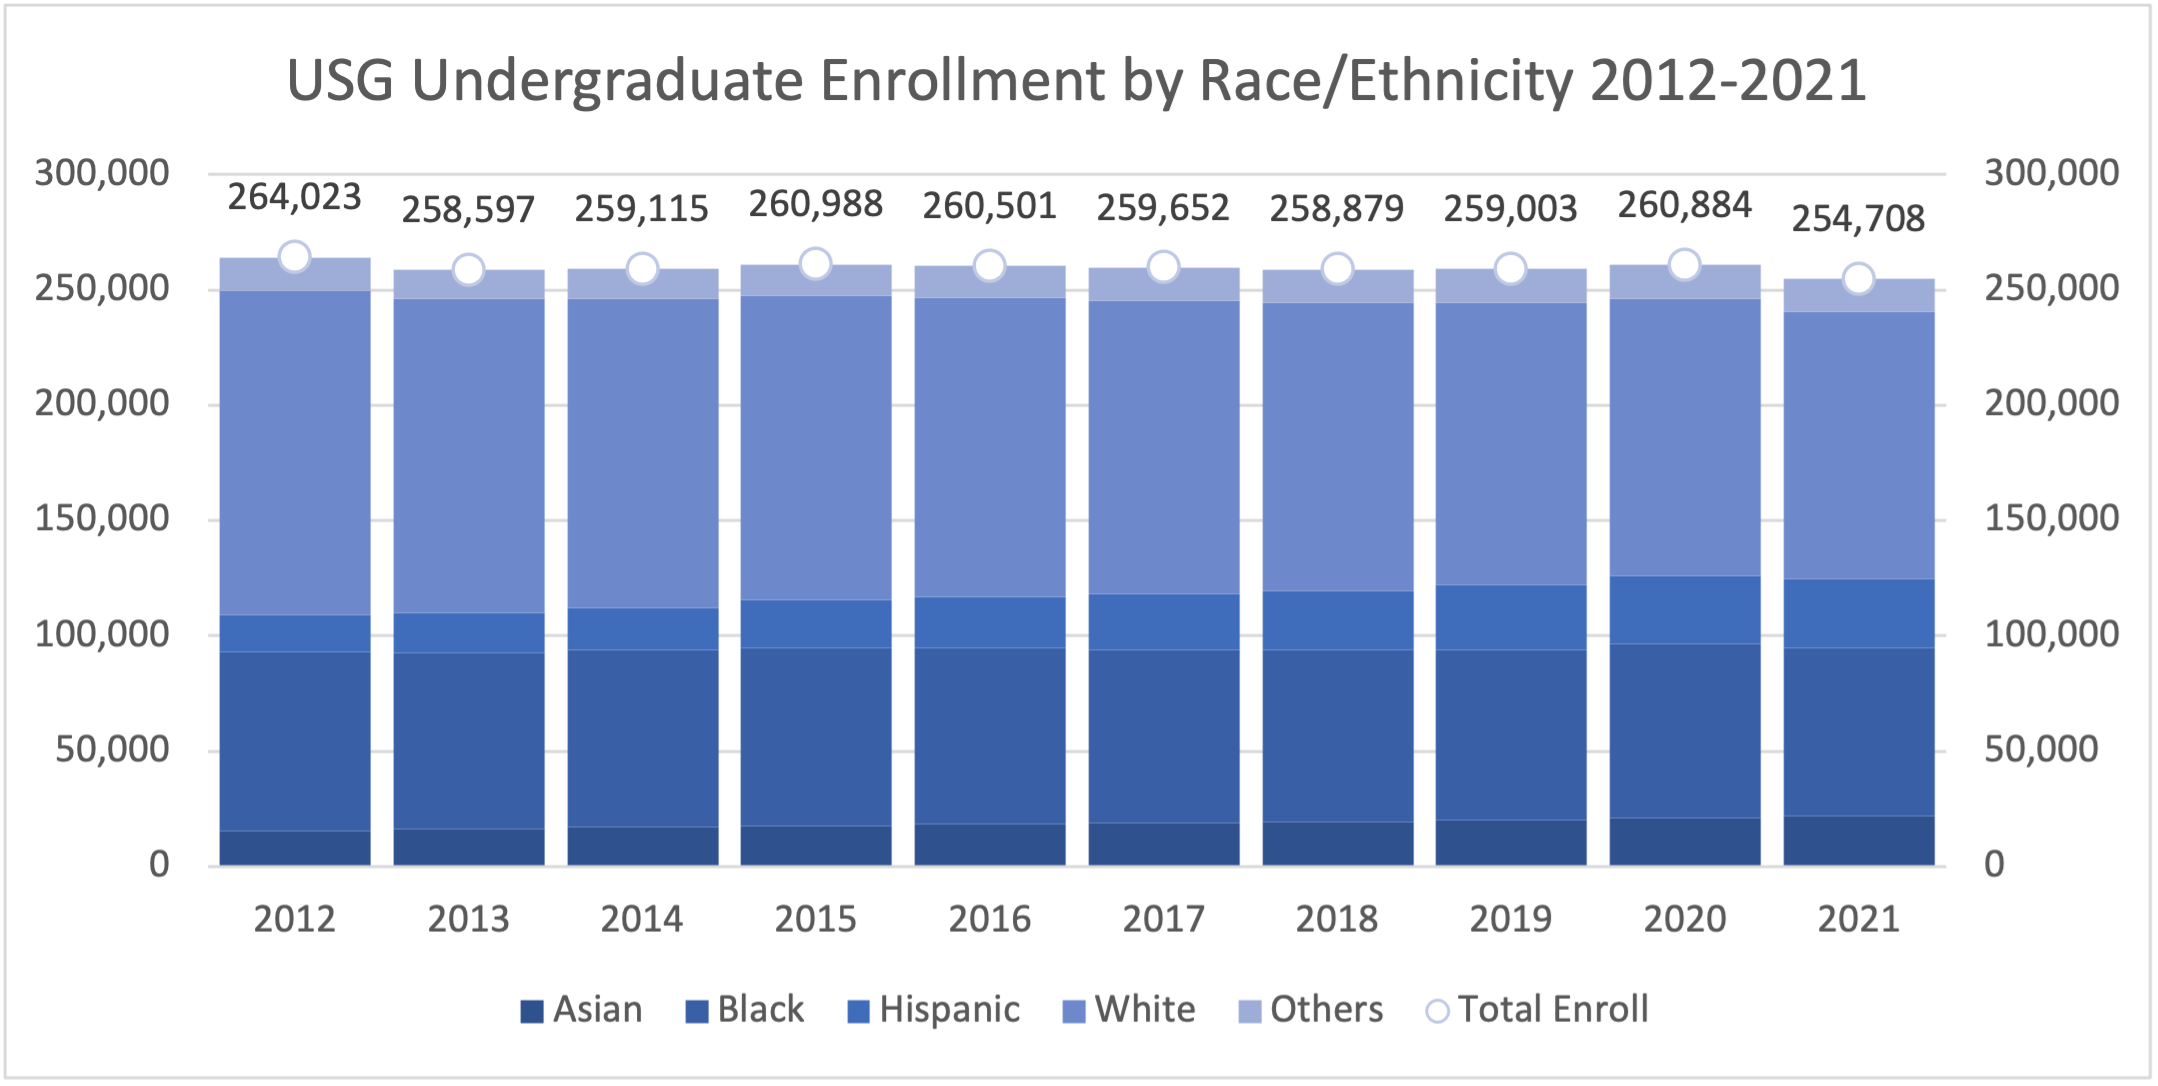 USG Undergraduate Enrollment by Race and Ethnicity